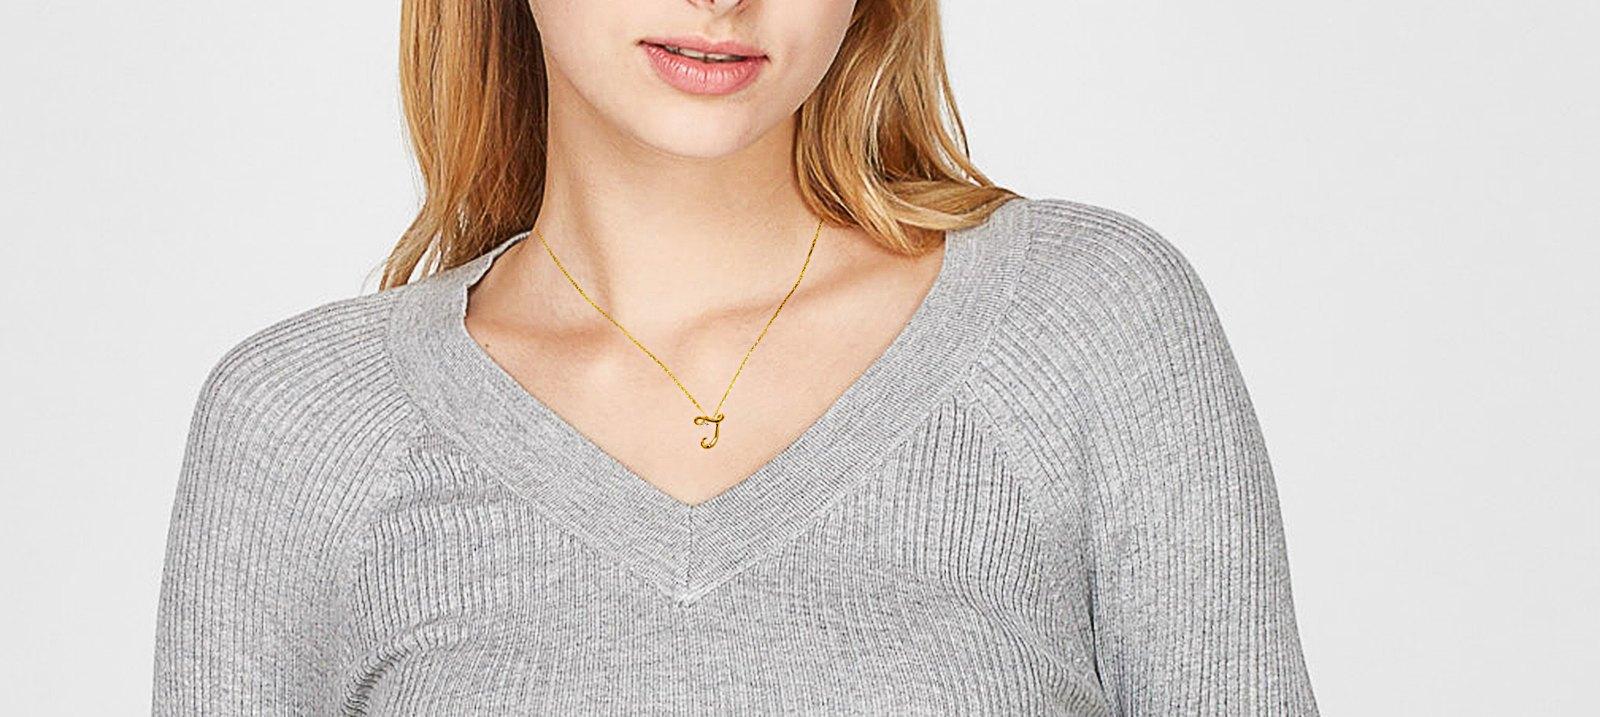 Jewelers：Gold Letter Necklace